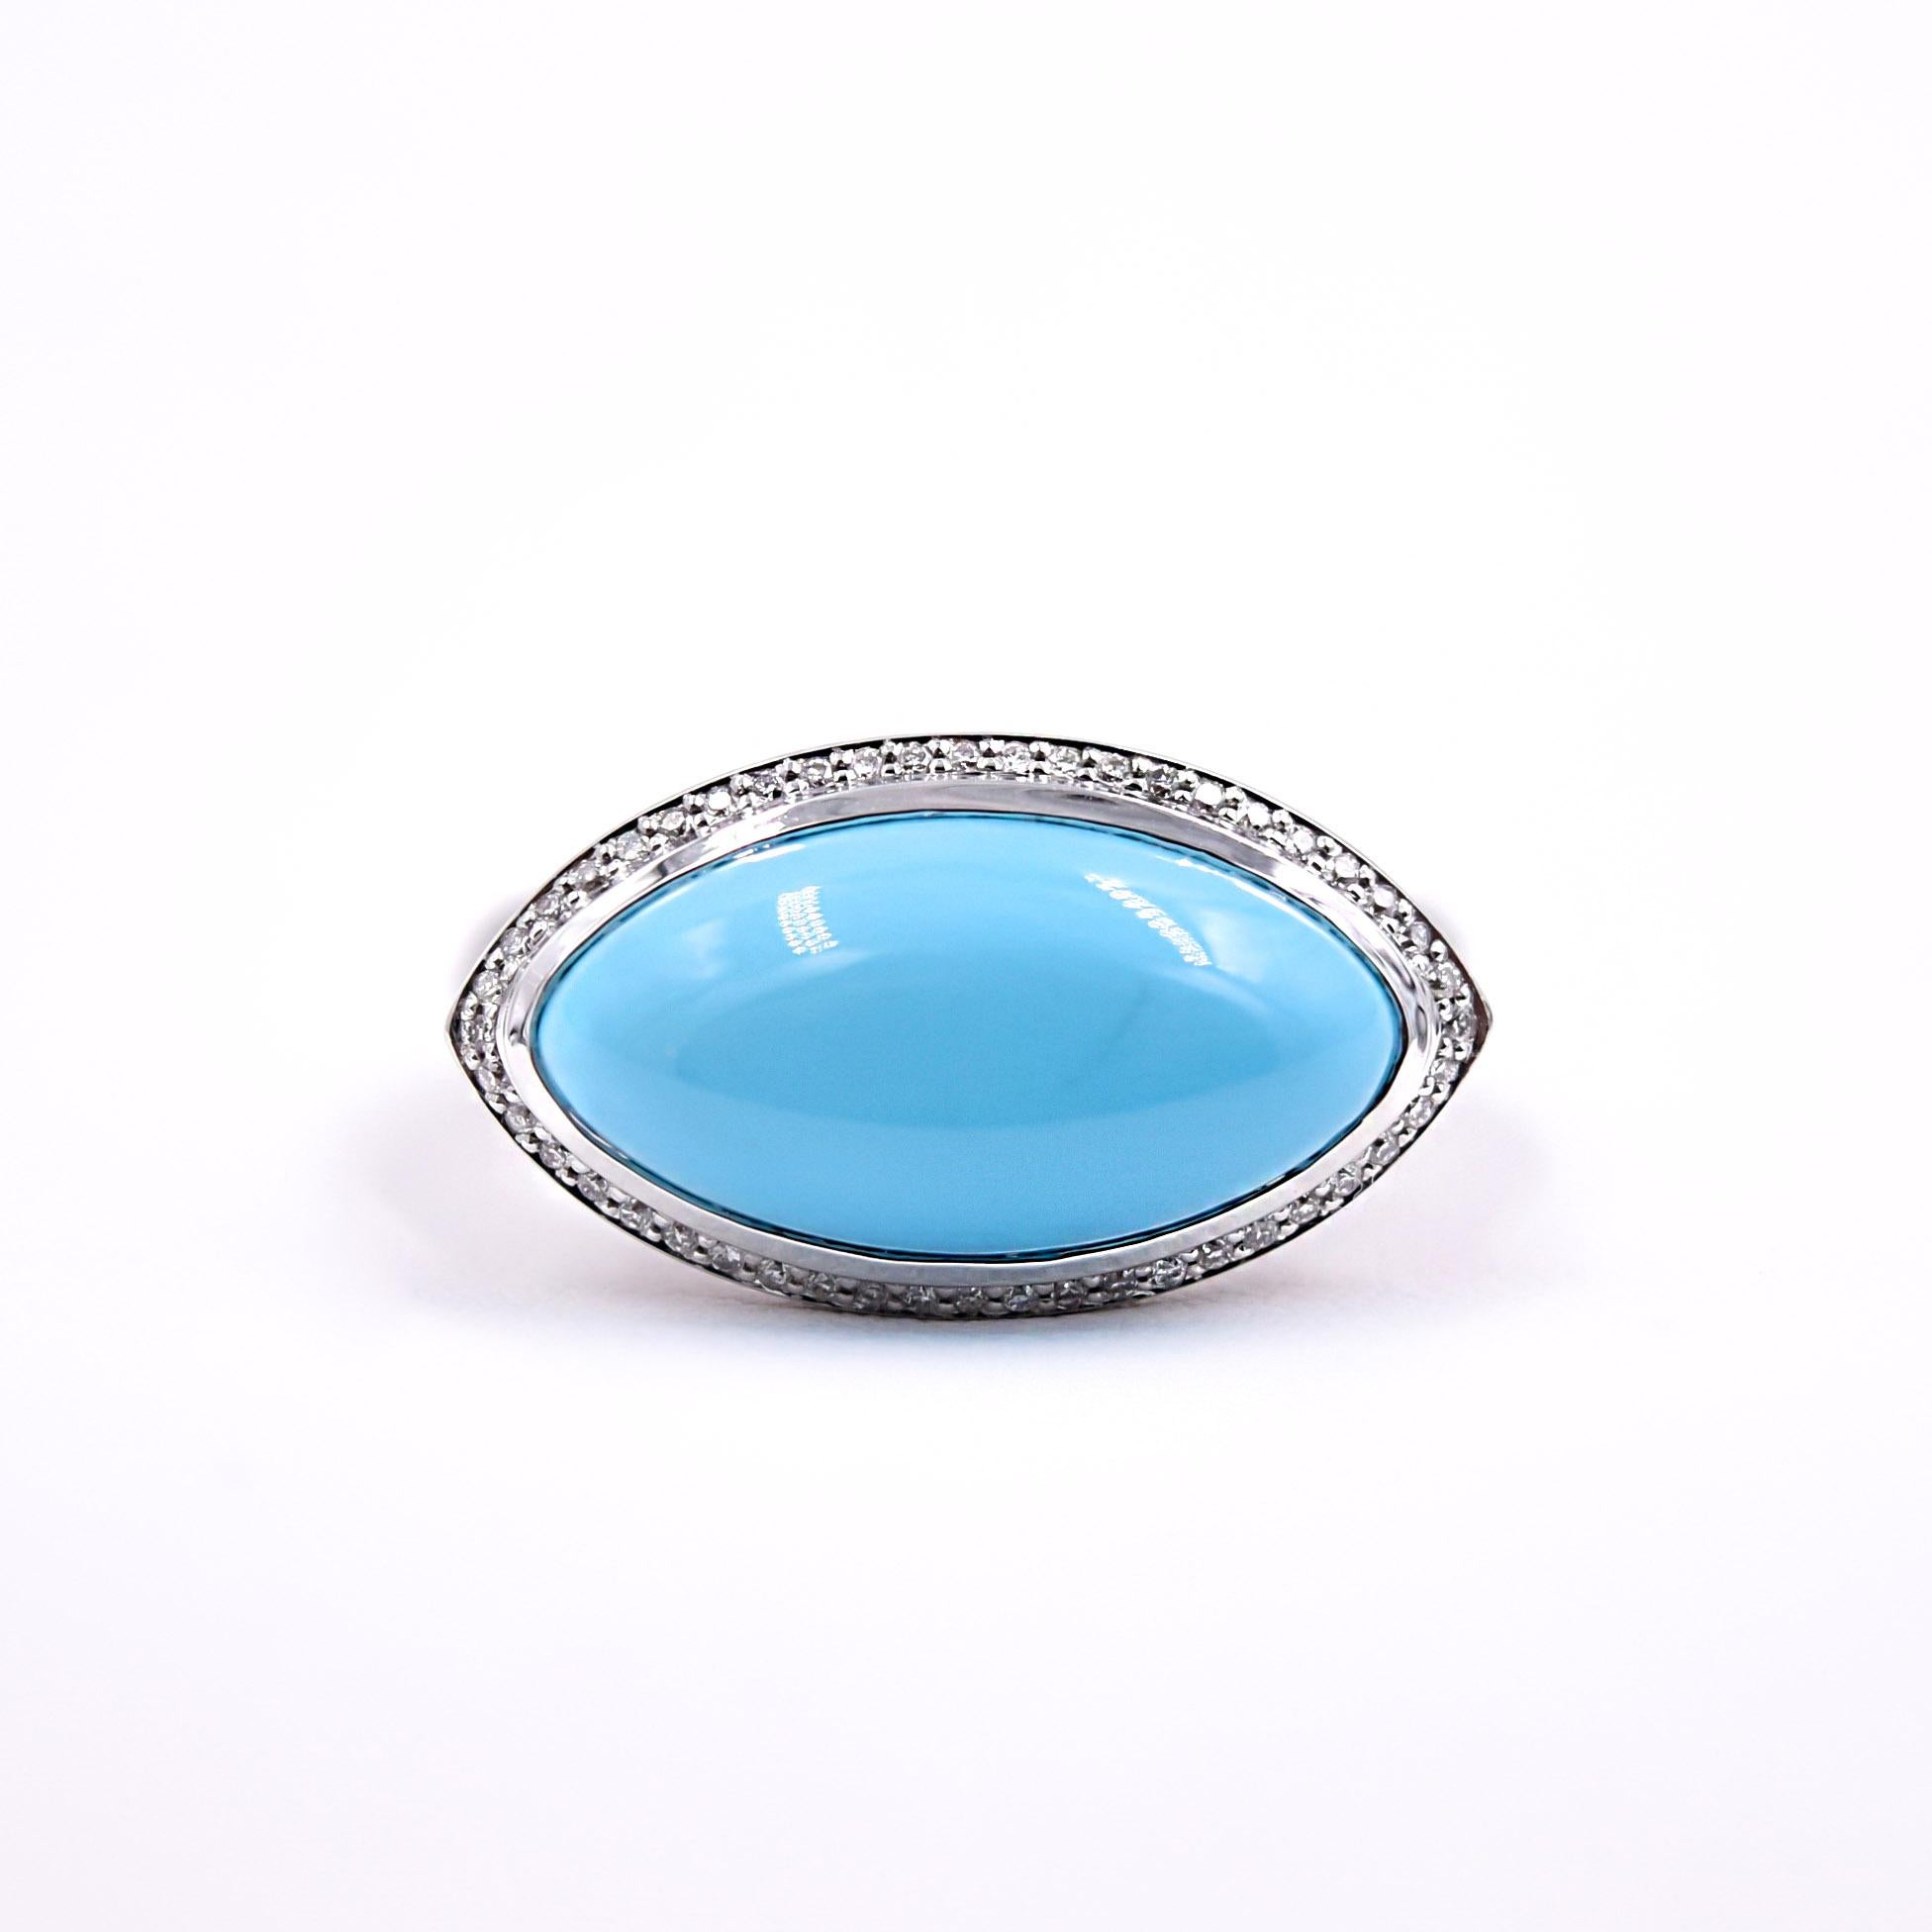 - Sleeping Beauty colored 4.72ct Cabochon Turquoise Statement Ring
- Setting East to West of marquise shaped Turquoise
- Halo of White Diamonds .12cts
- Sand blasted 18K White Gold Finish
- Size 6.5 
- This Ring can be sized